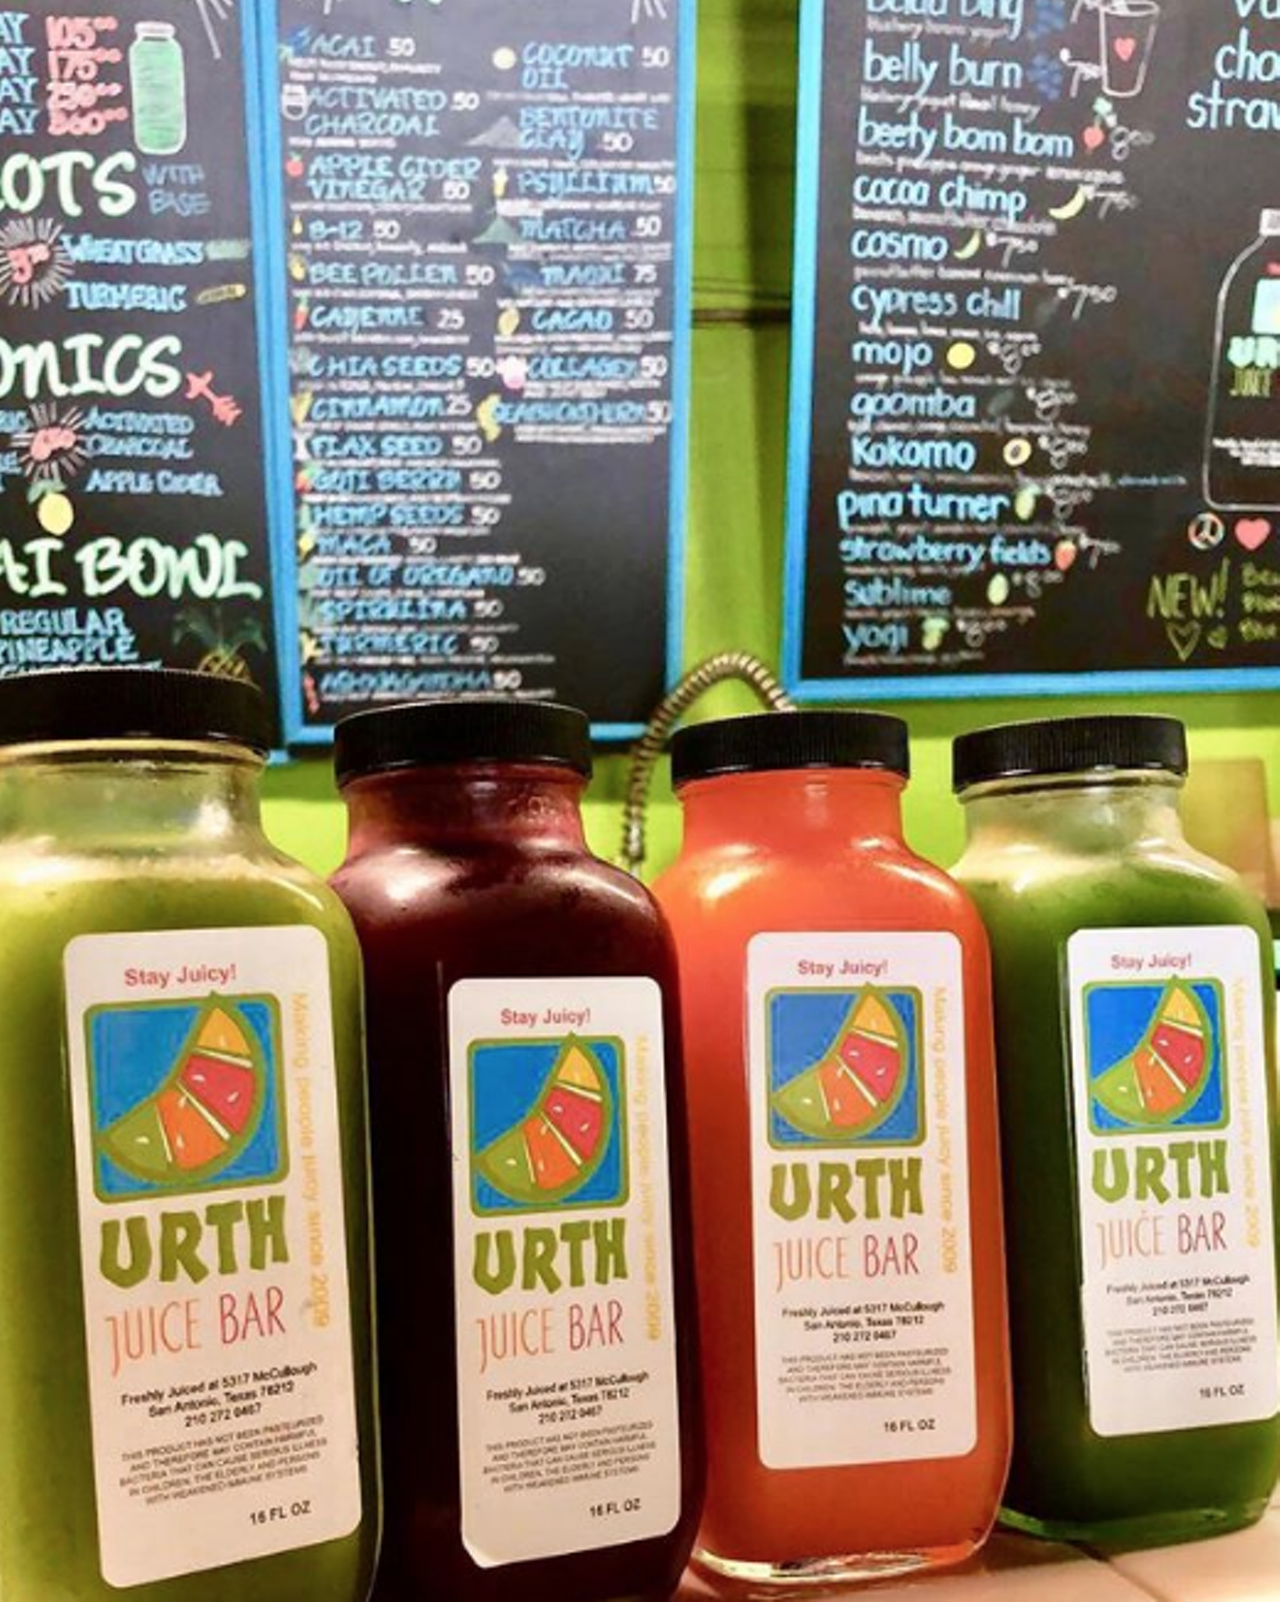 For freshly-made juice in a variety of flavors, plus smoothies and acai bowls, you can stop by Urth Juice Bar. These products are made with carefully-sourced ingredients, and you can even add CBD oils to your juice of choice. You’ll really be feeling refreshed with one of these.
Photo via Instagram / ivskitchen